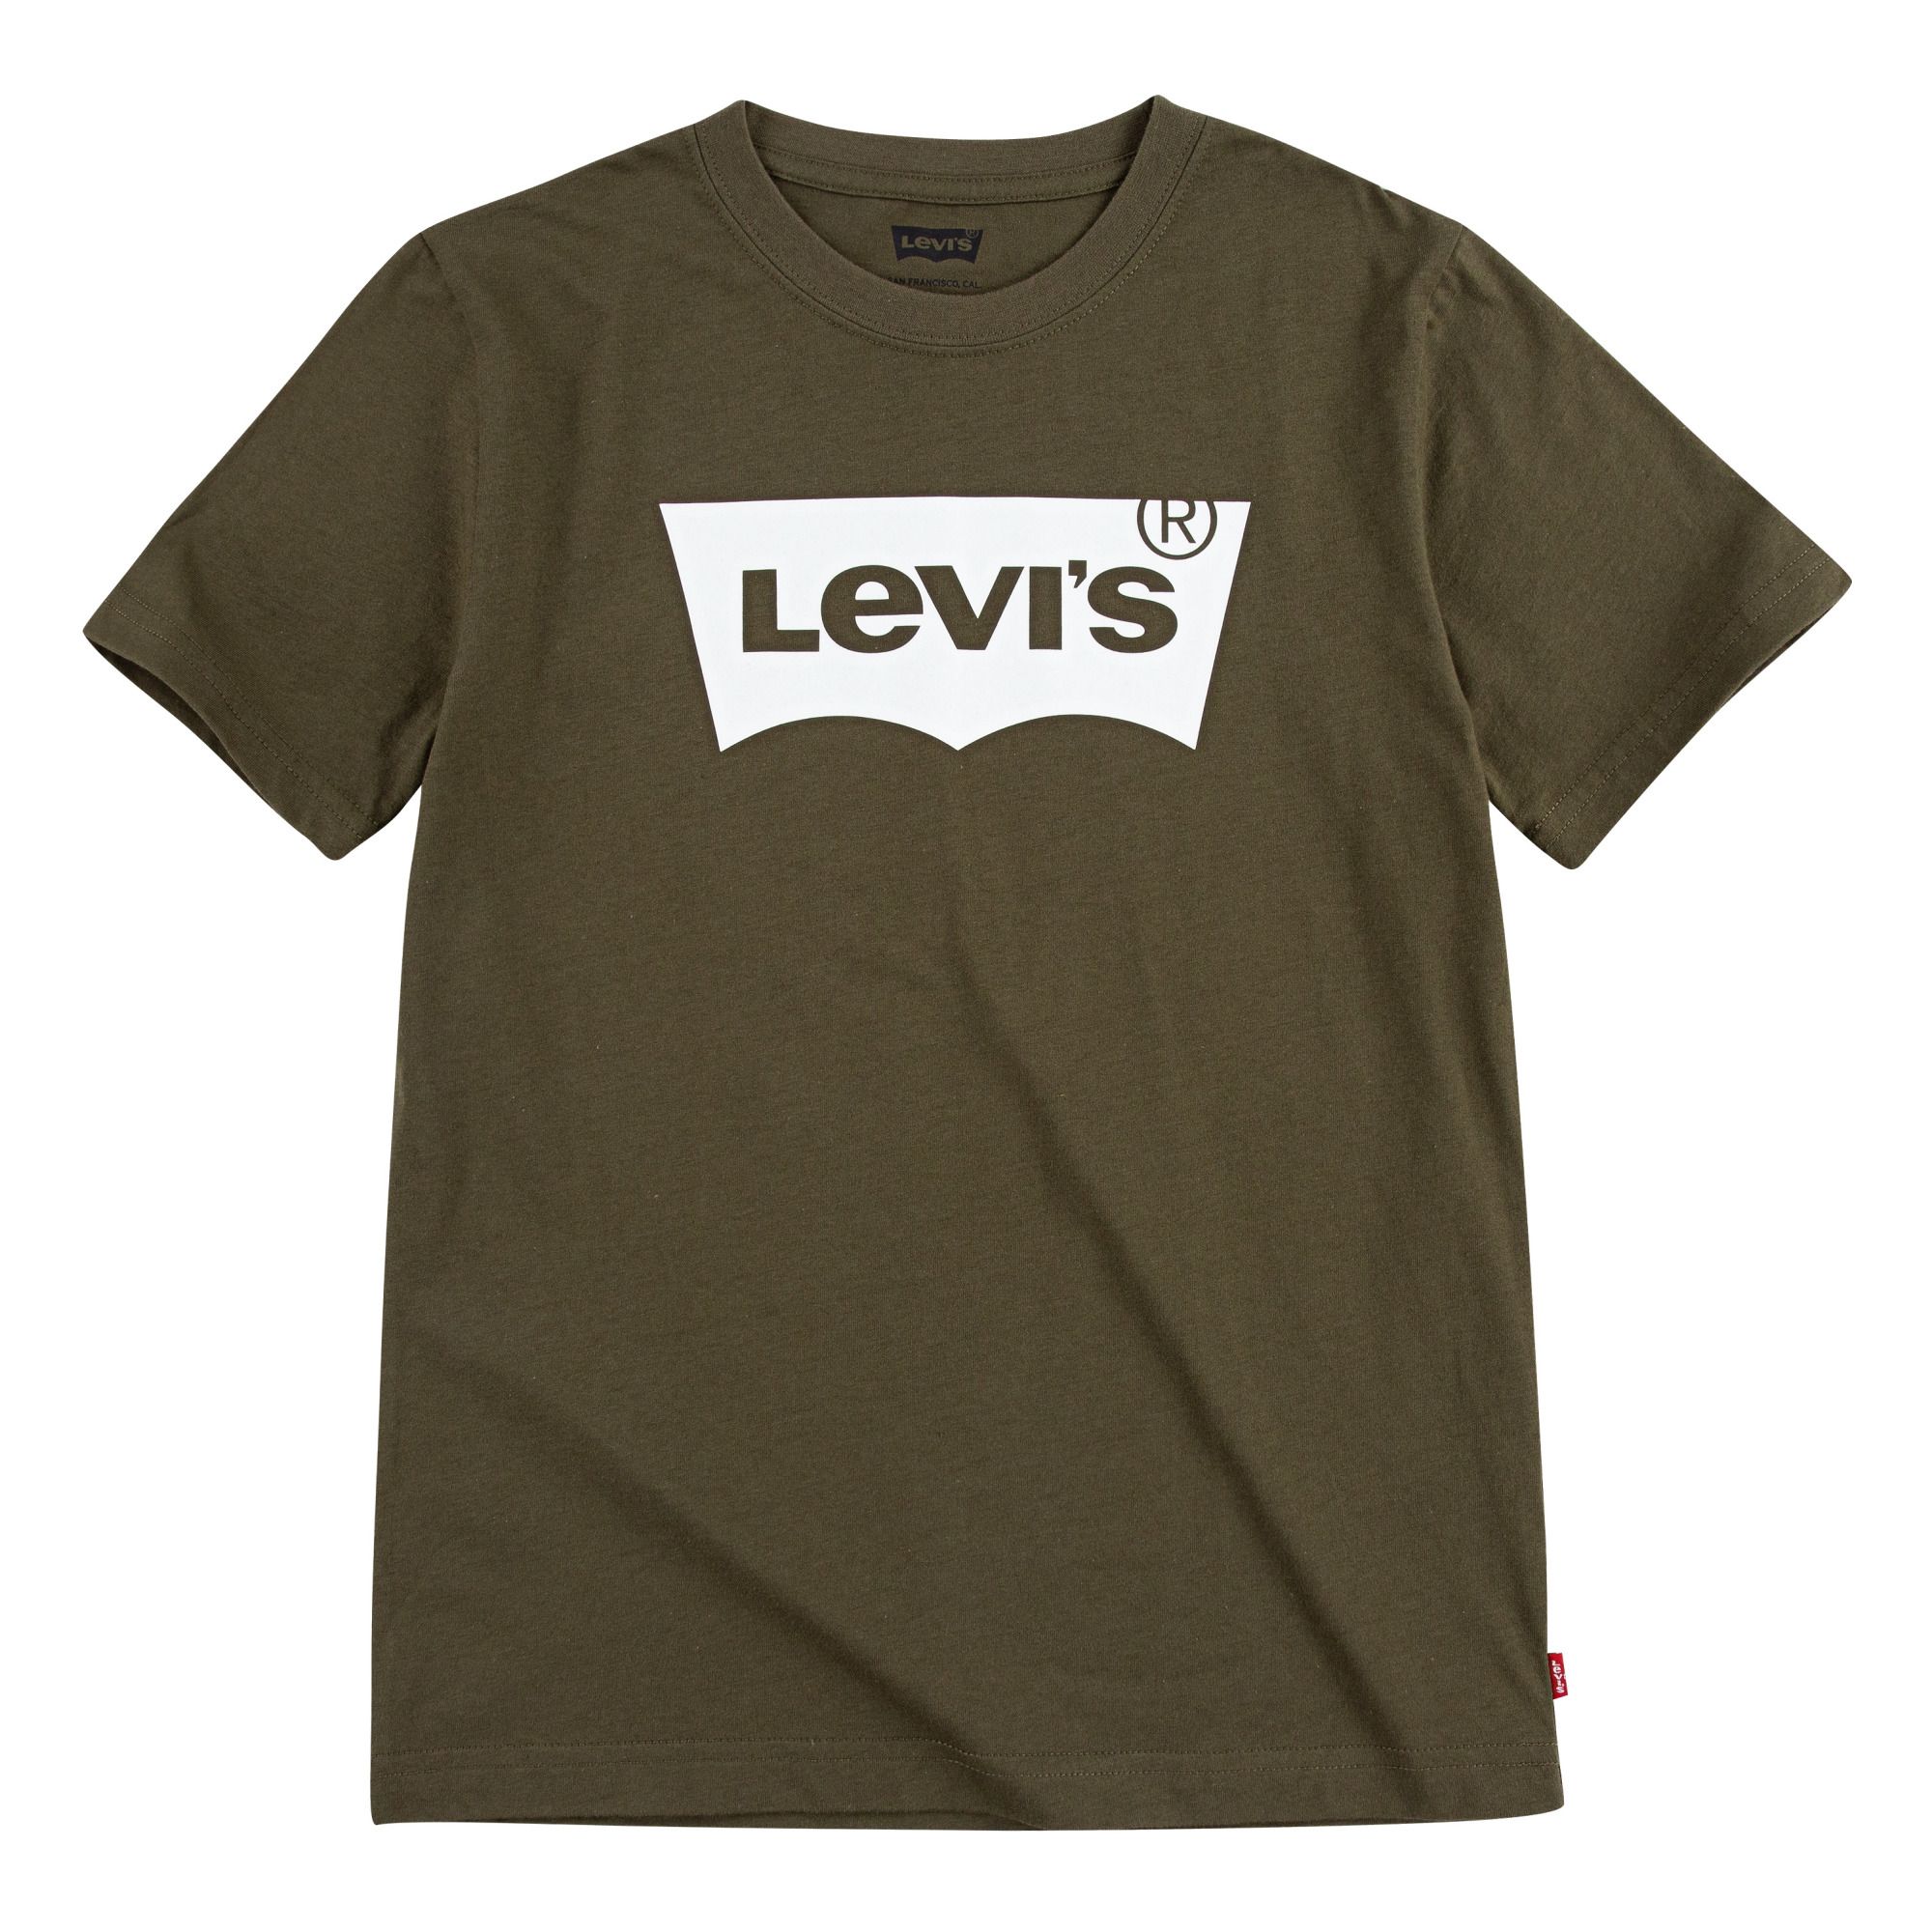 Levi's - Batwing T-shirt - Olive green | Smallable